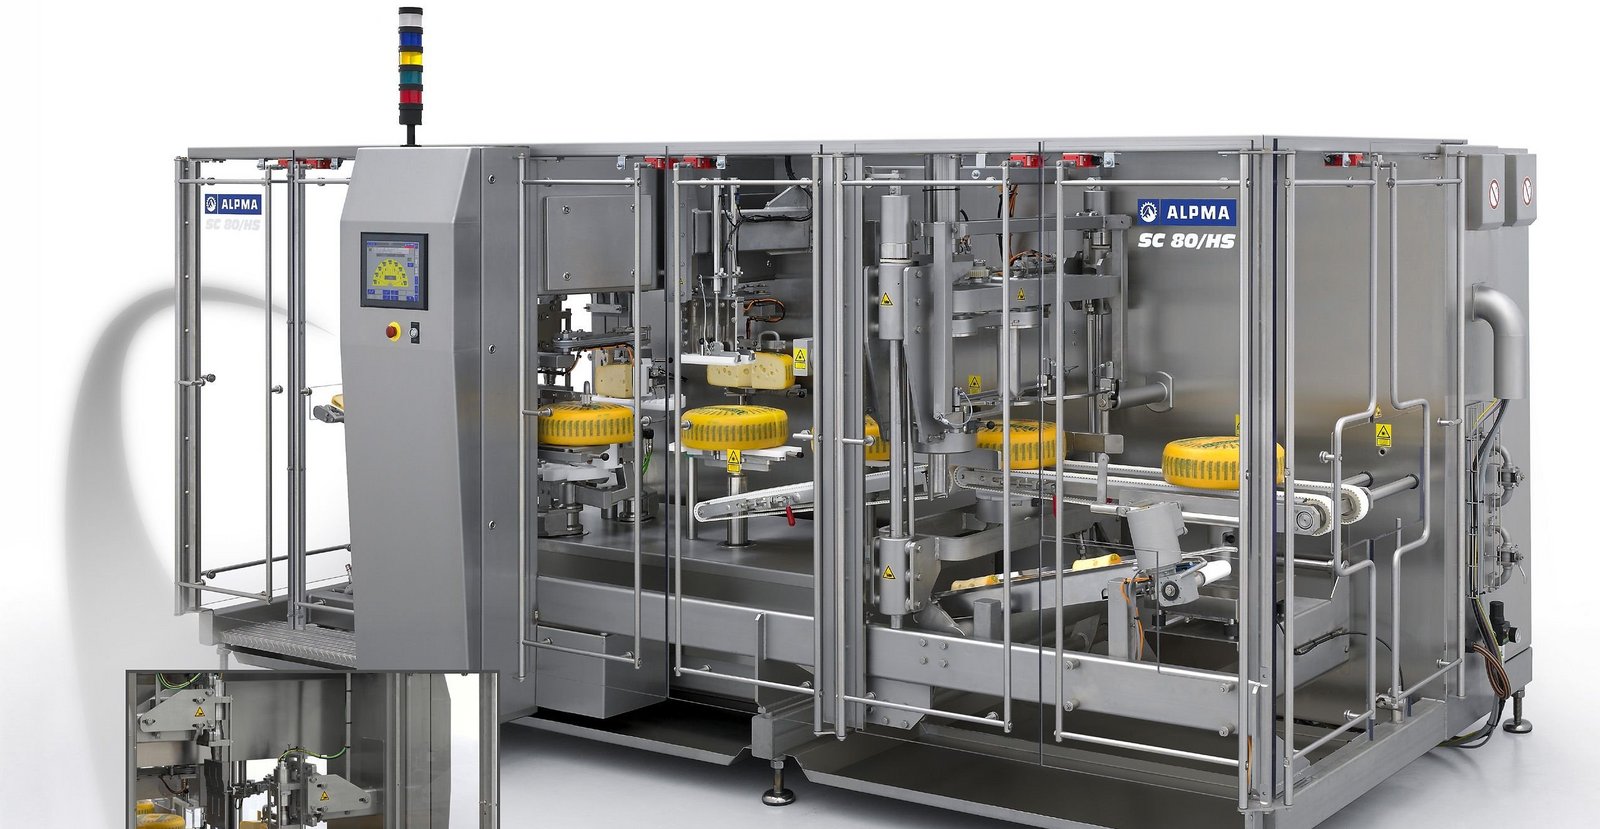 robertpack-in-zwolle-is-exclusive-partner-of-alpma-machines-for-cheese-cutting-and-packaging-technology